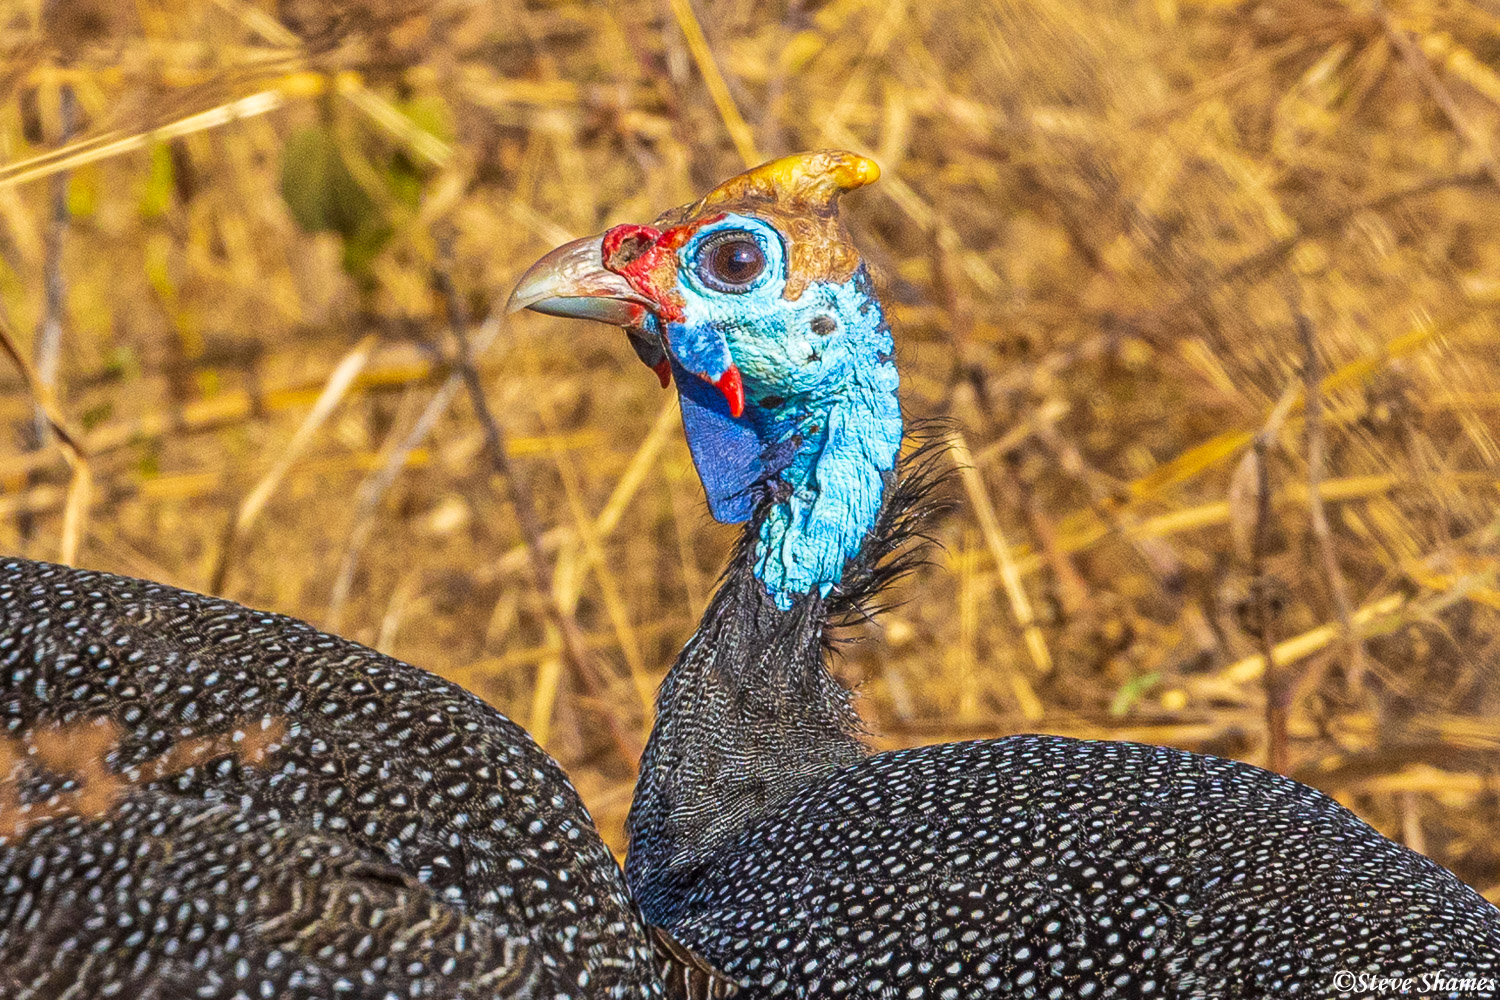 There are millions of guineafowl around, a close up shows their colorful head.